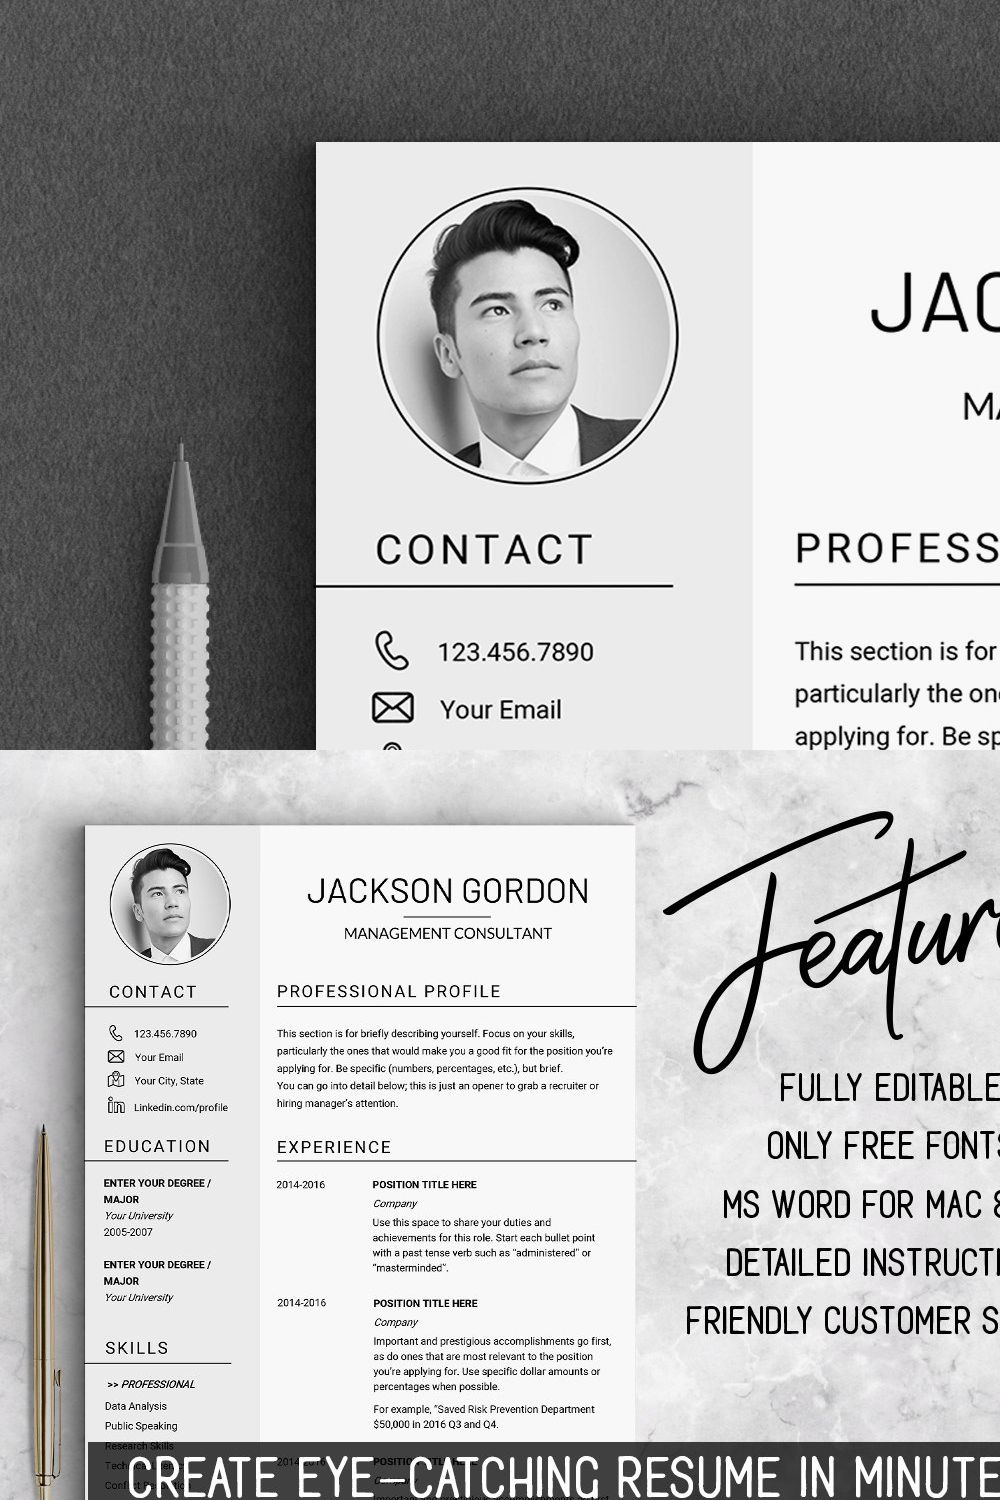 Professional RESUME TEMPLATE / JG pinterest preview image.